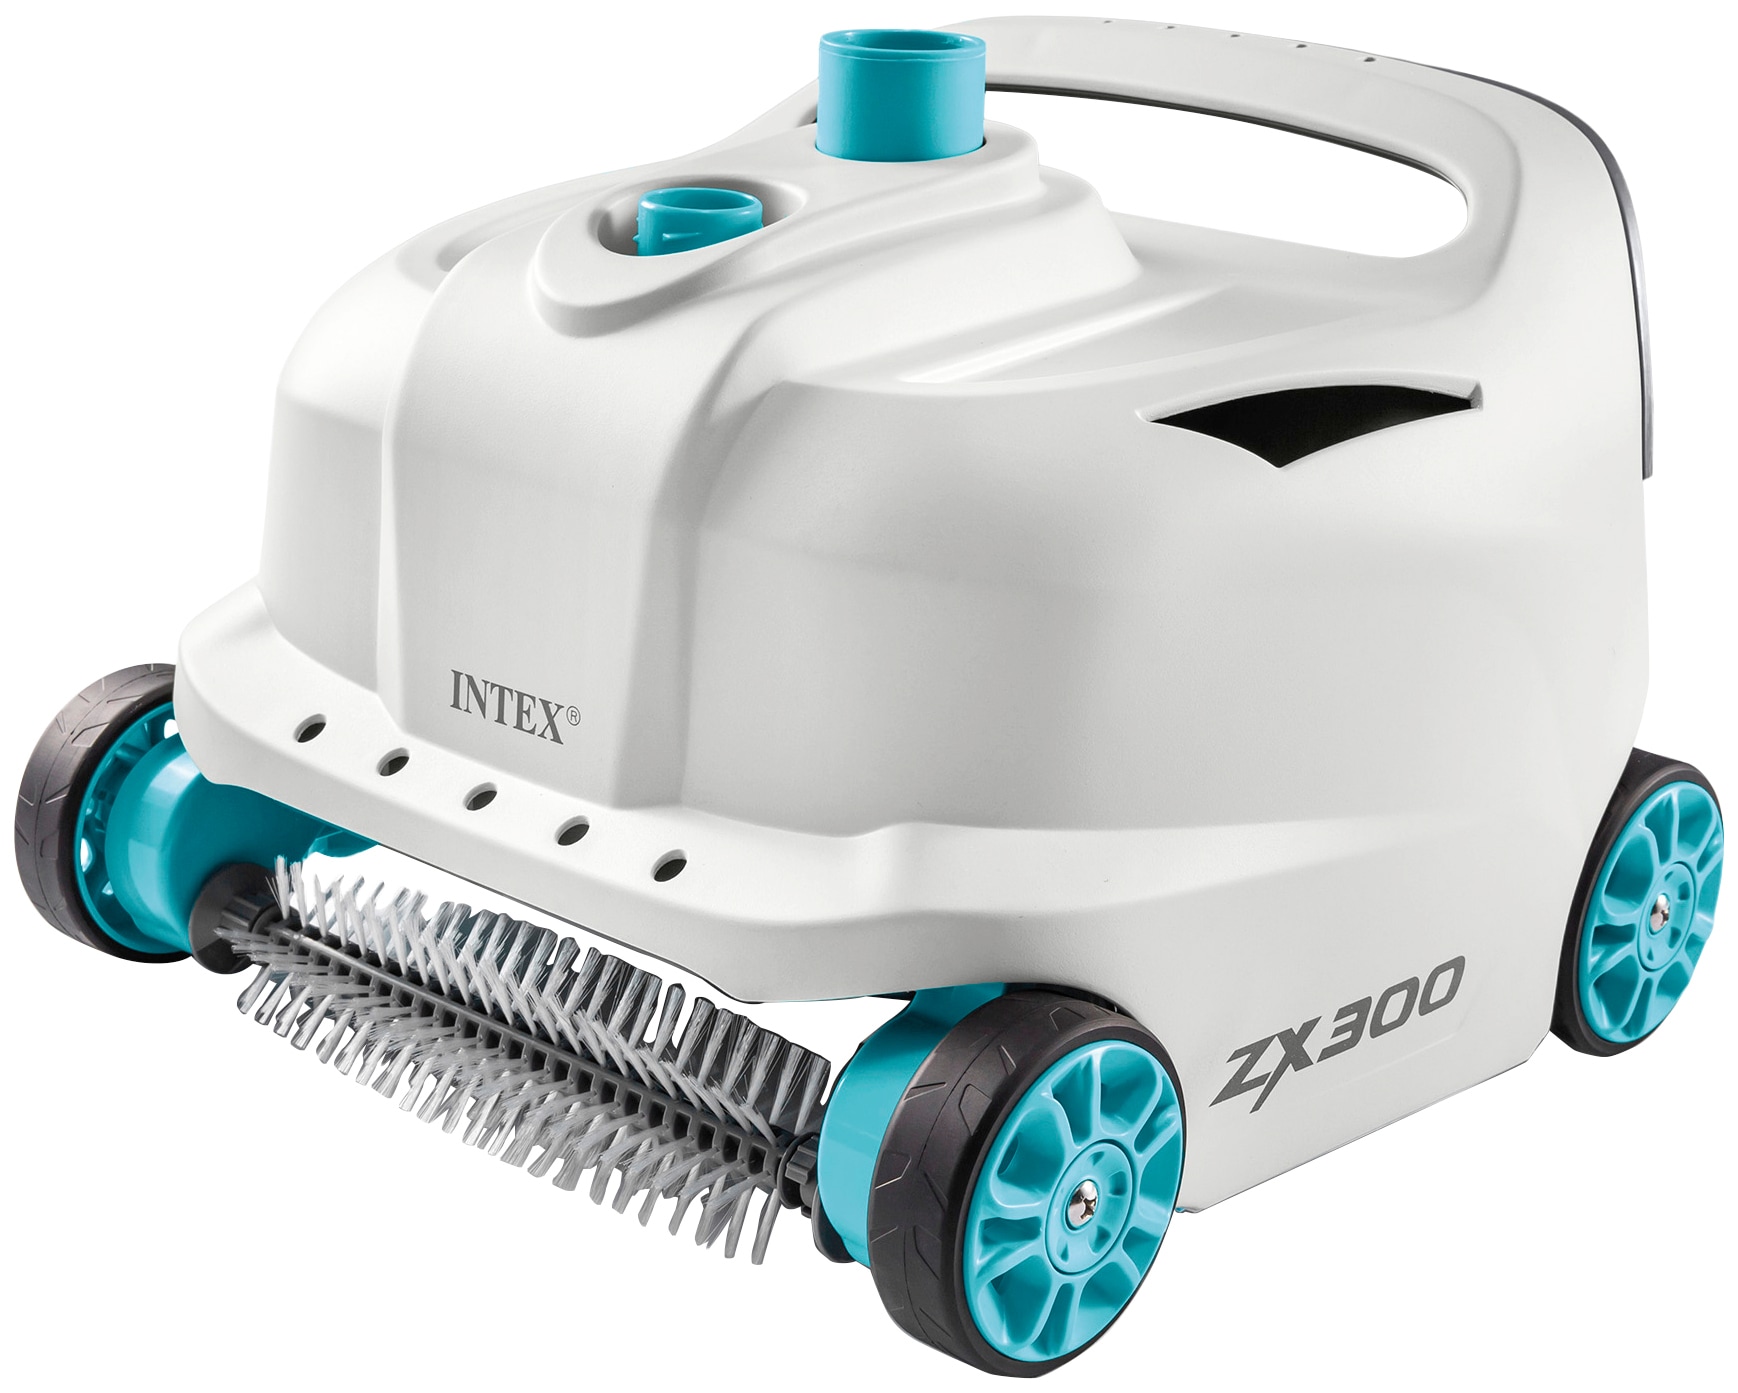 Poolbodensauger »Pool-Cleaner Deluxe ZX300«, inkl. Schlauch